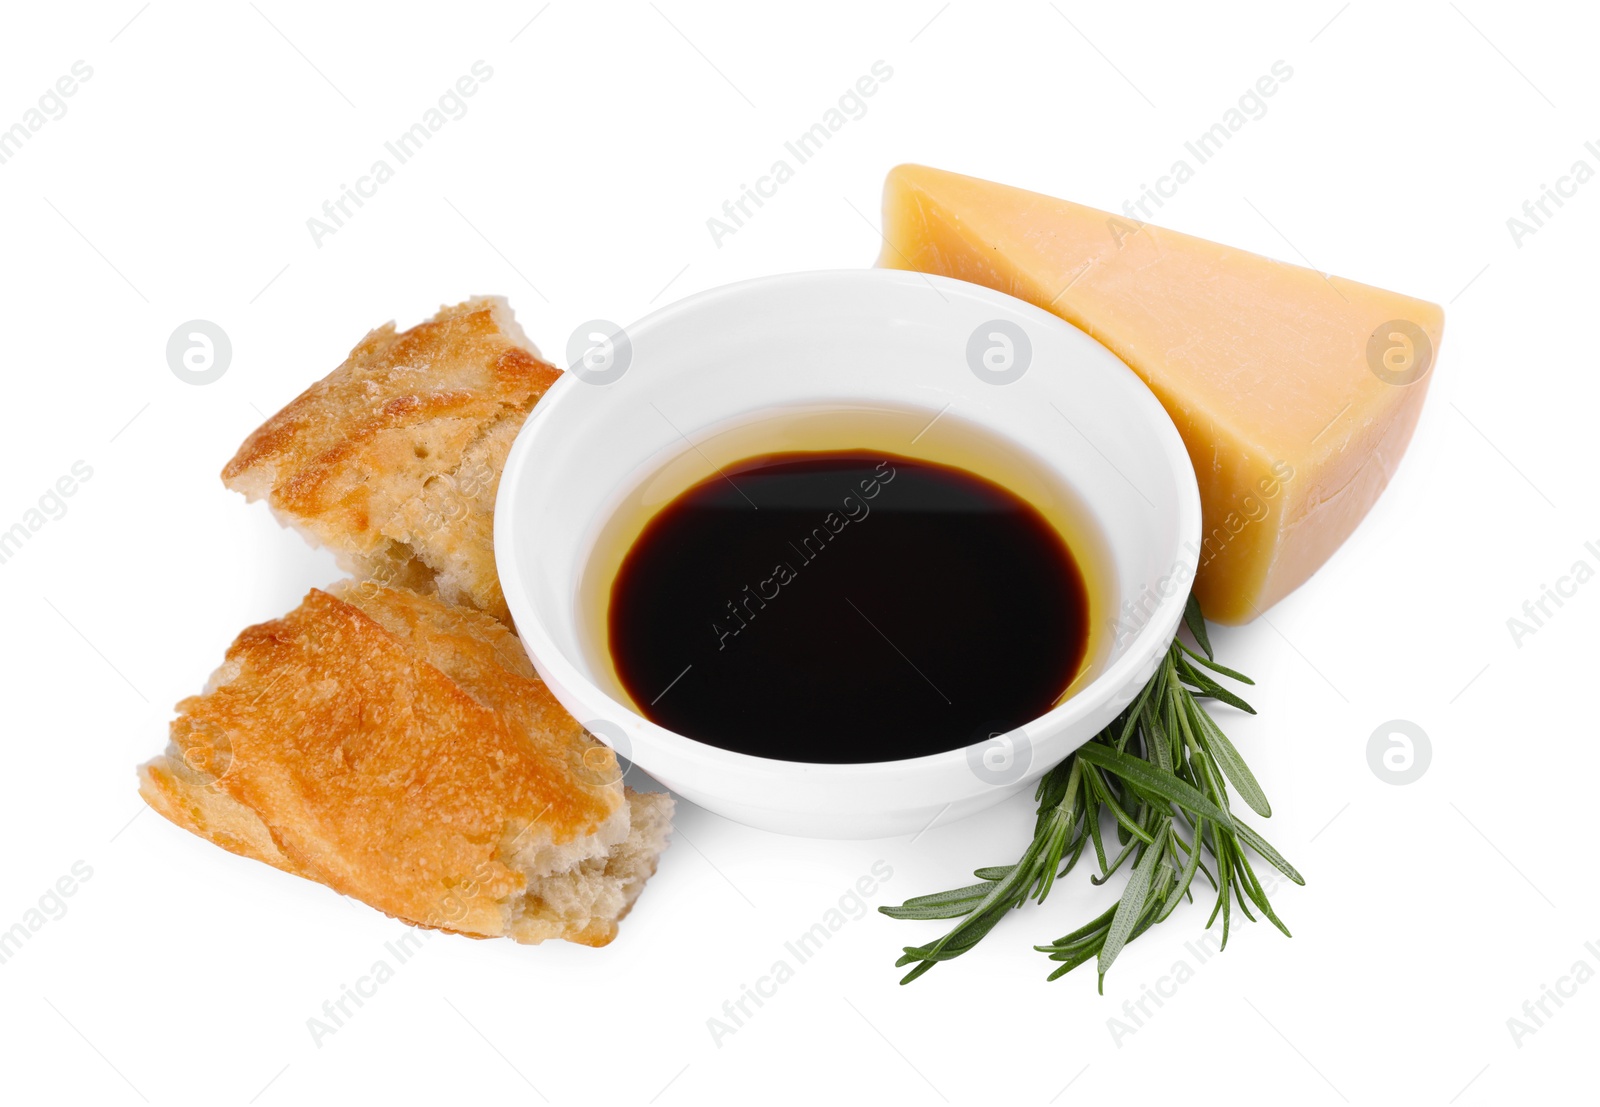 Photo of Bowl of balsamic vinegar with oil, bread, parmesan cheese and rosemary on white background